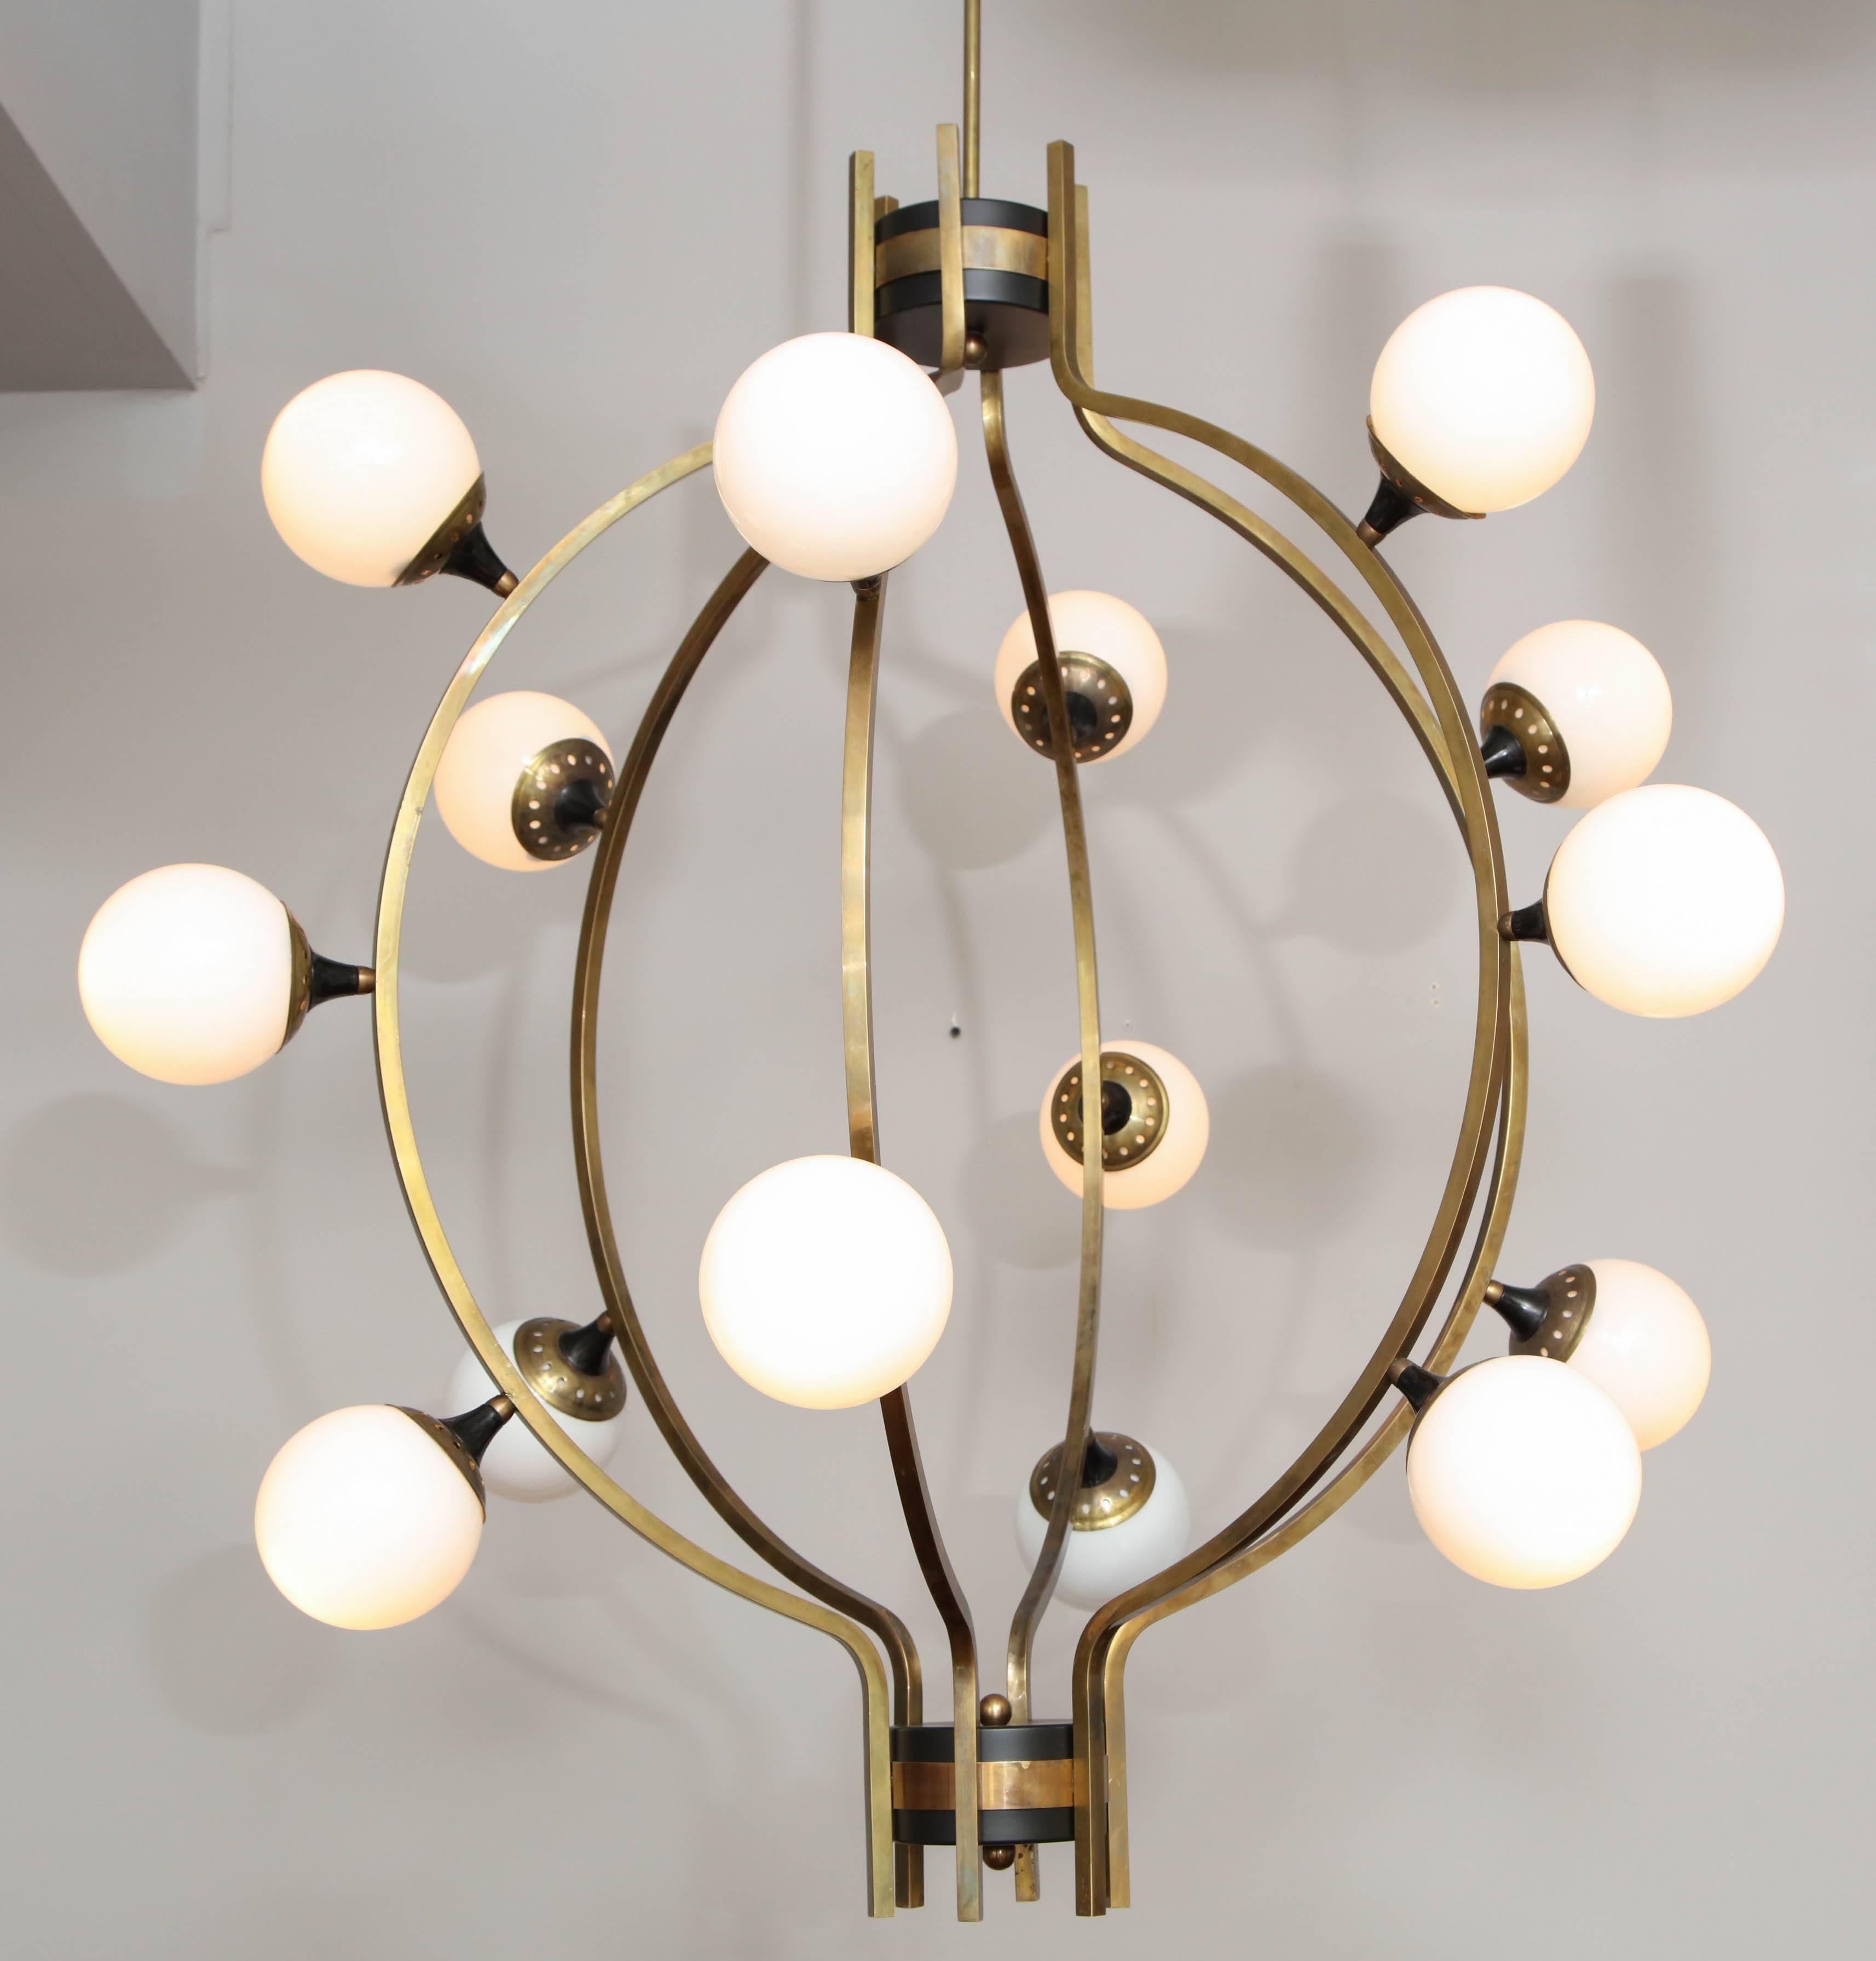 Huge custom circular chandelier in the manner of Stilnovo. Custom orders are available in different sizes and finishes.